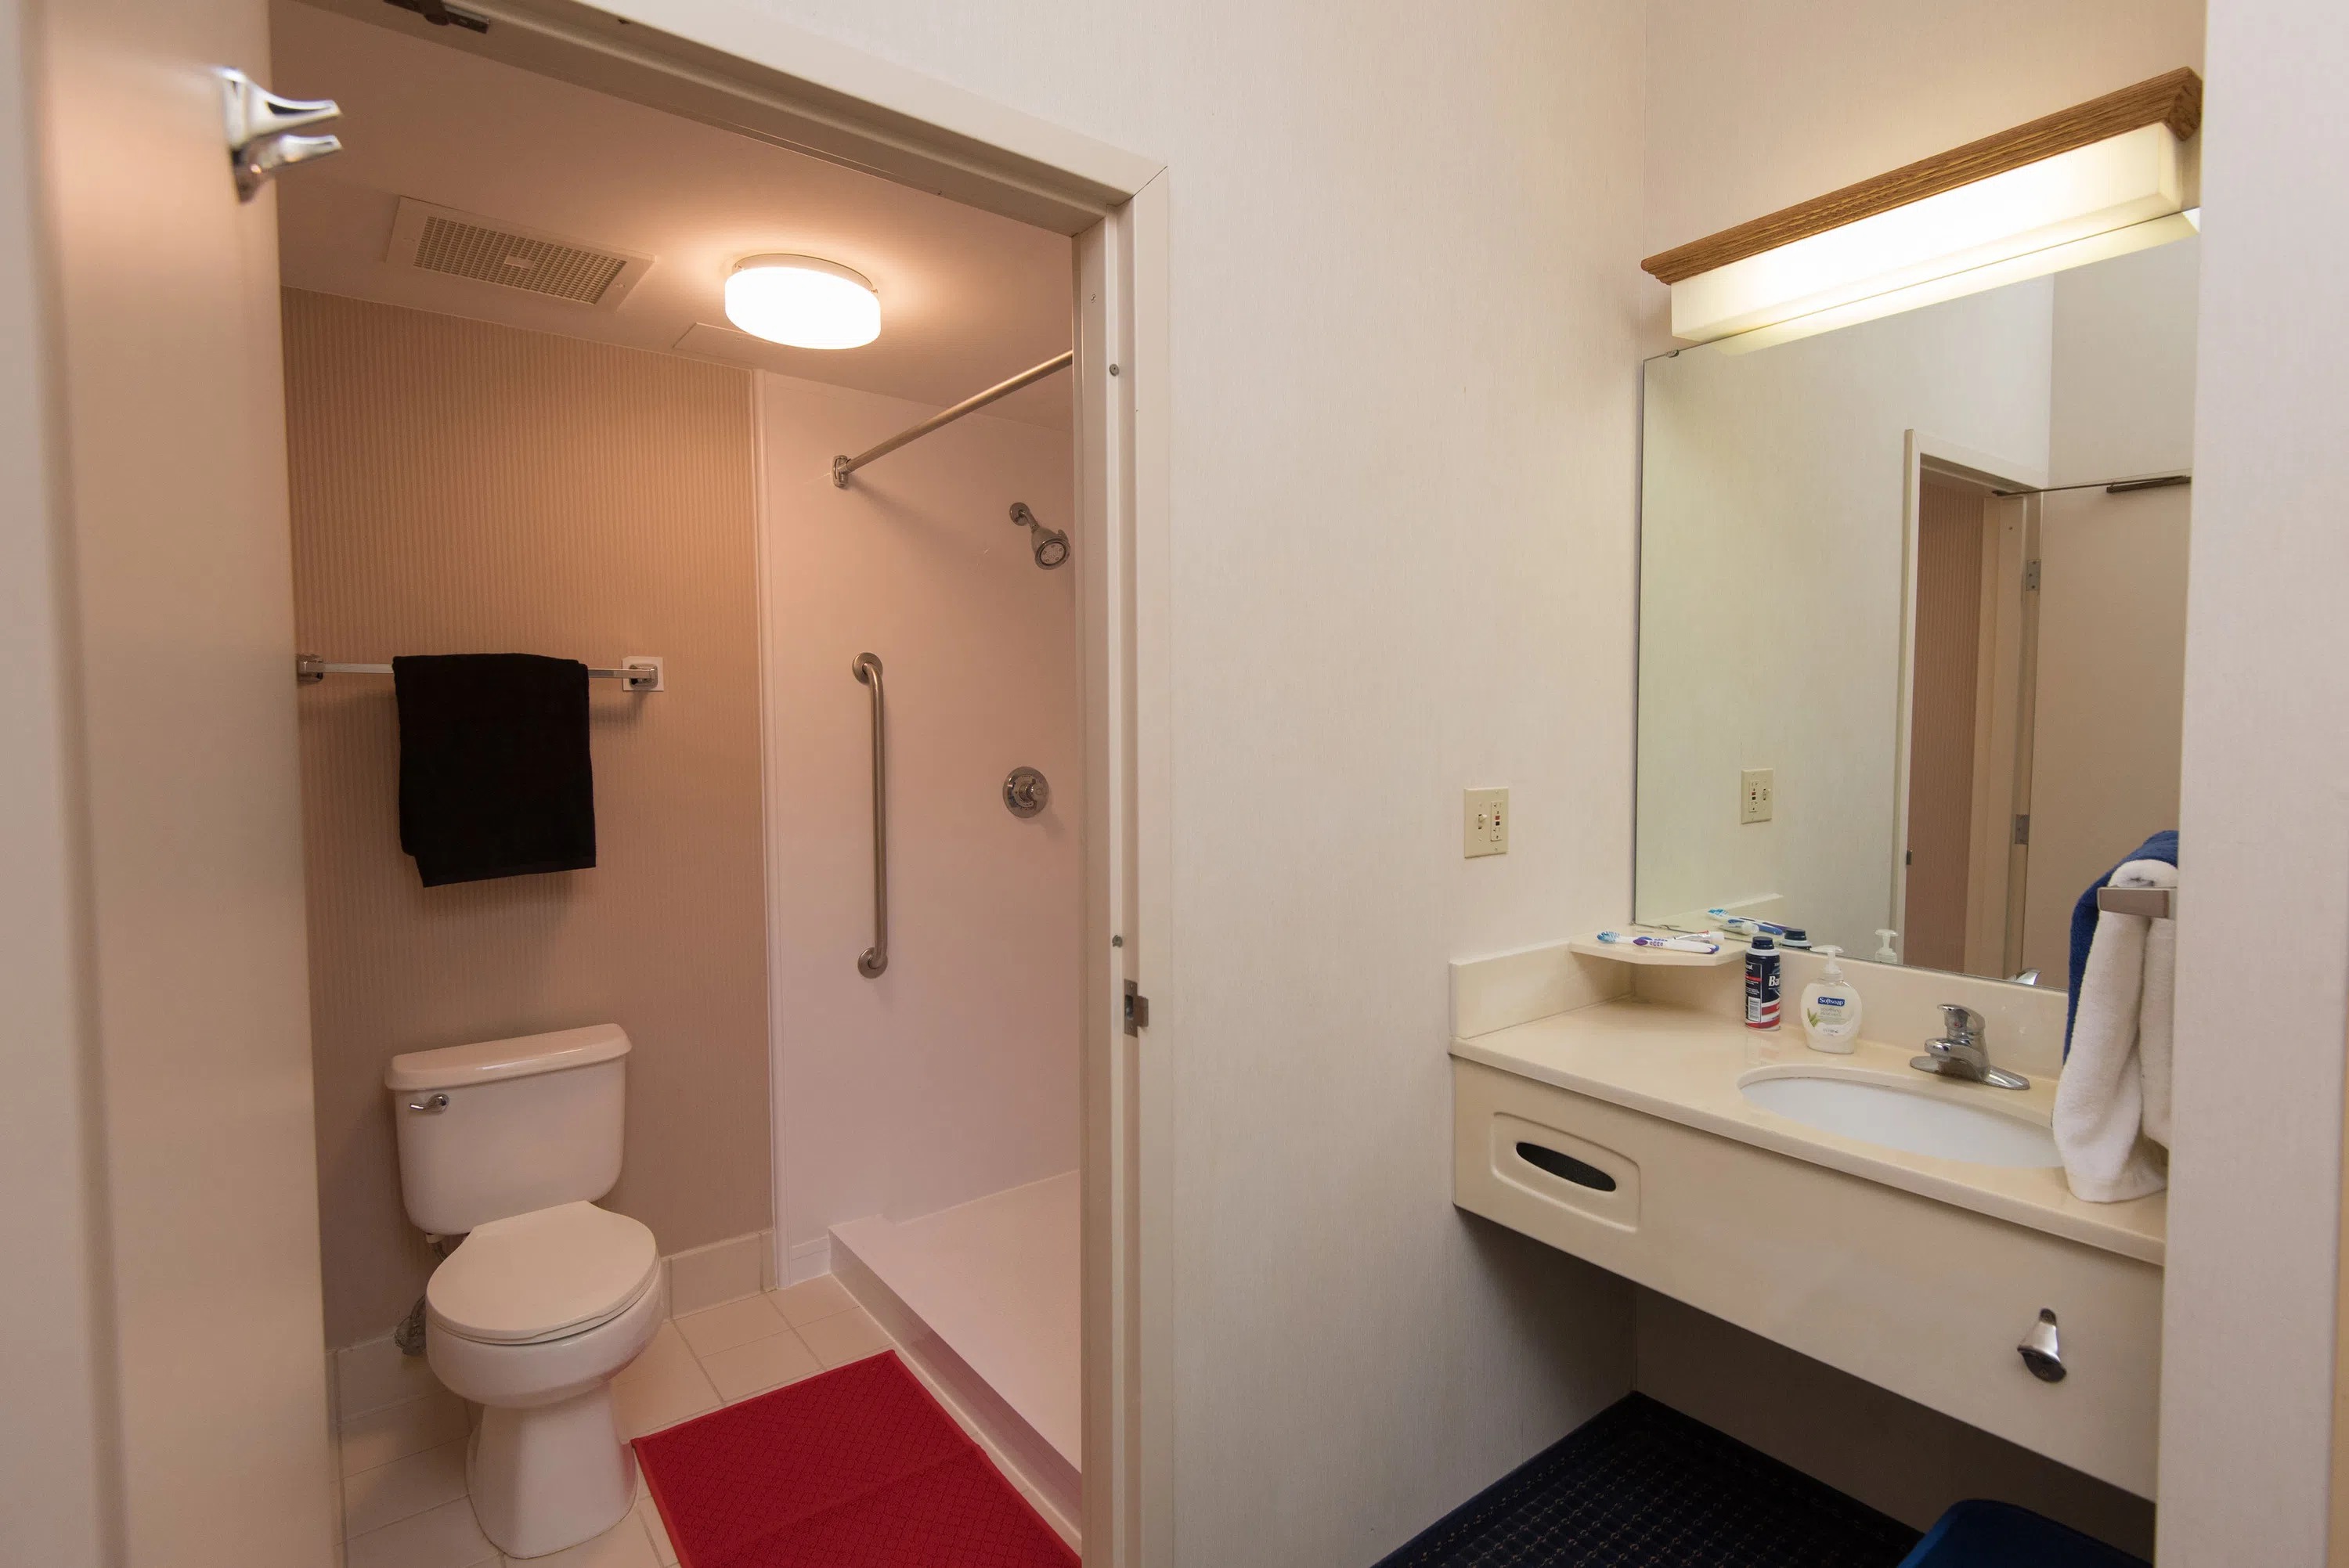 A look at the sink and toilet/shower set-up in each Potter Hall room. 